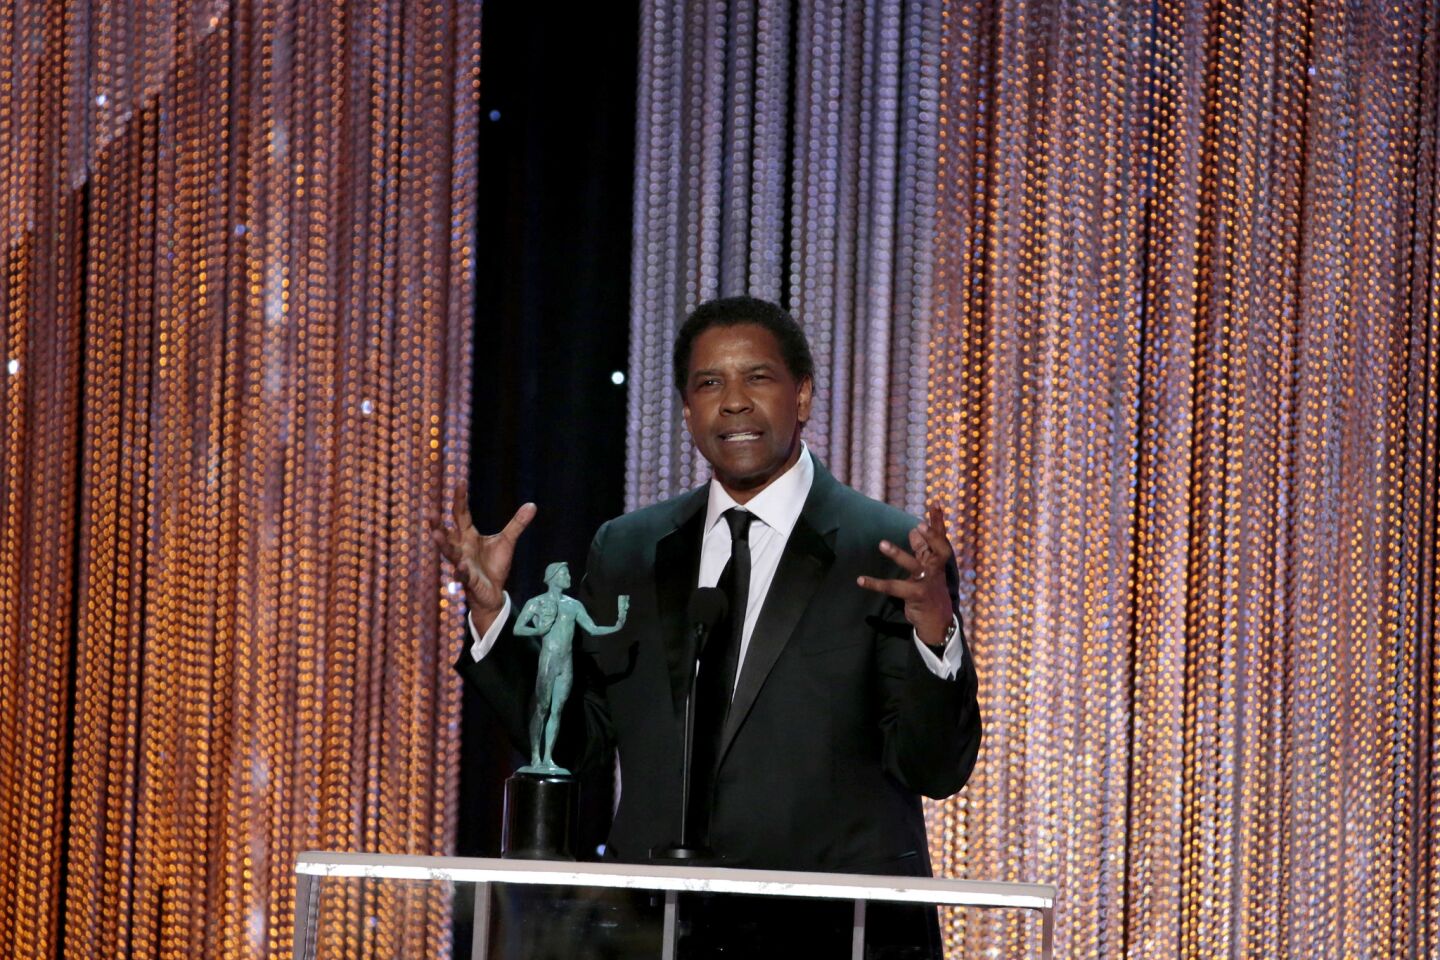 Denzel Washington wins for male actor in a leading role for "Fences."